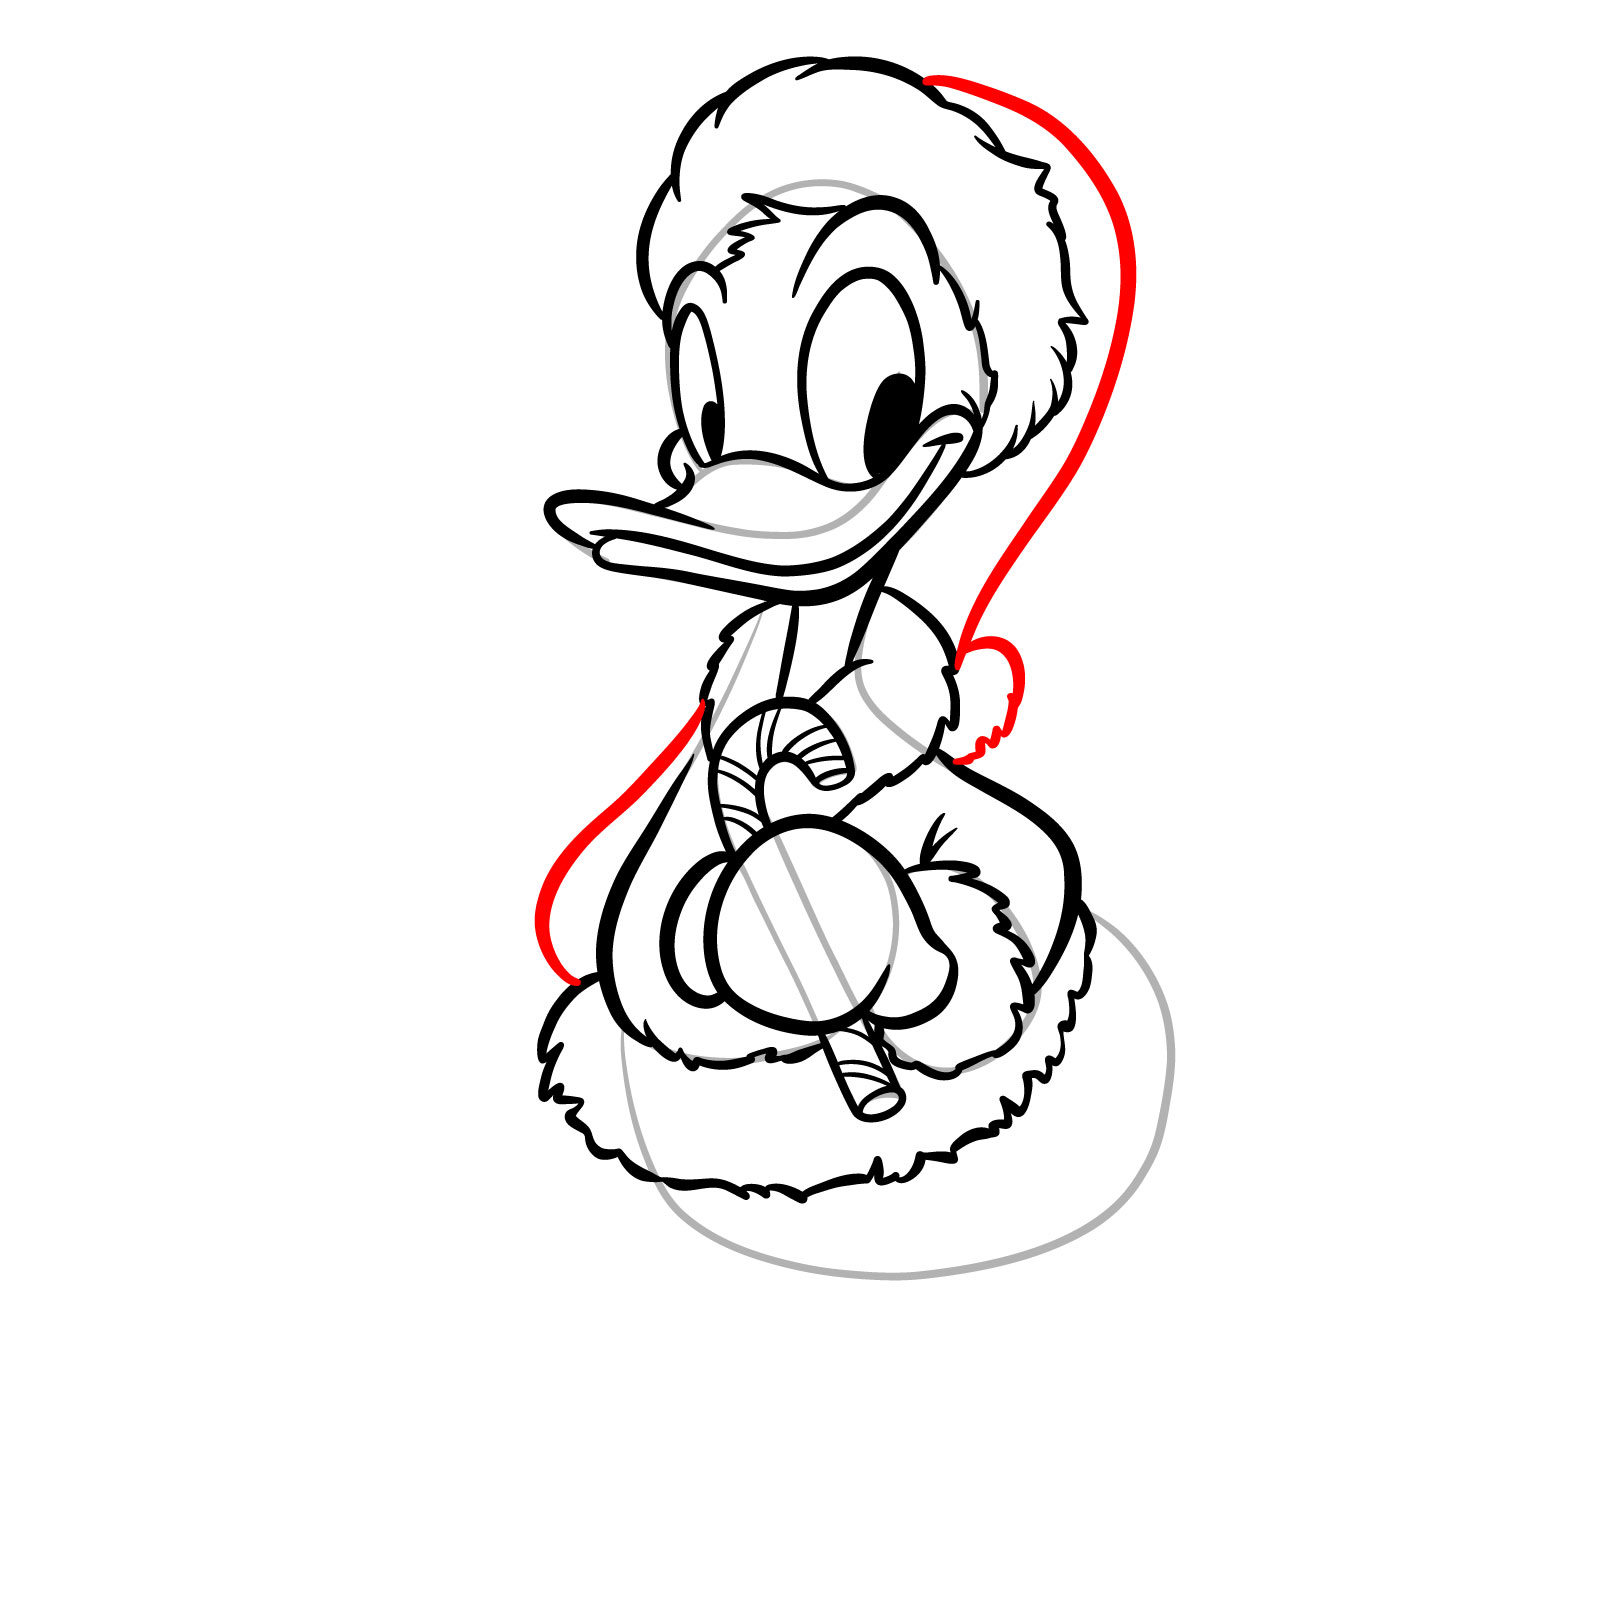 How to Draw Christmas Donald Duck - step 18